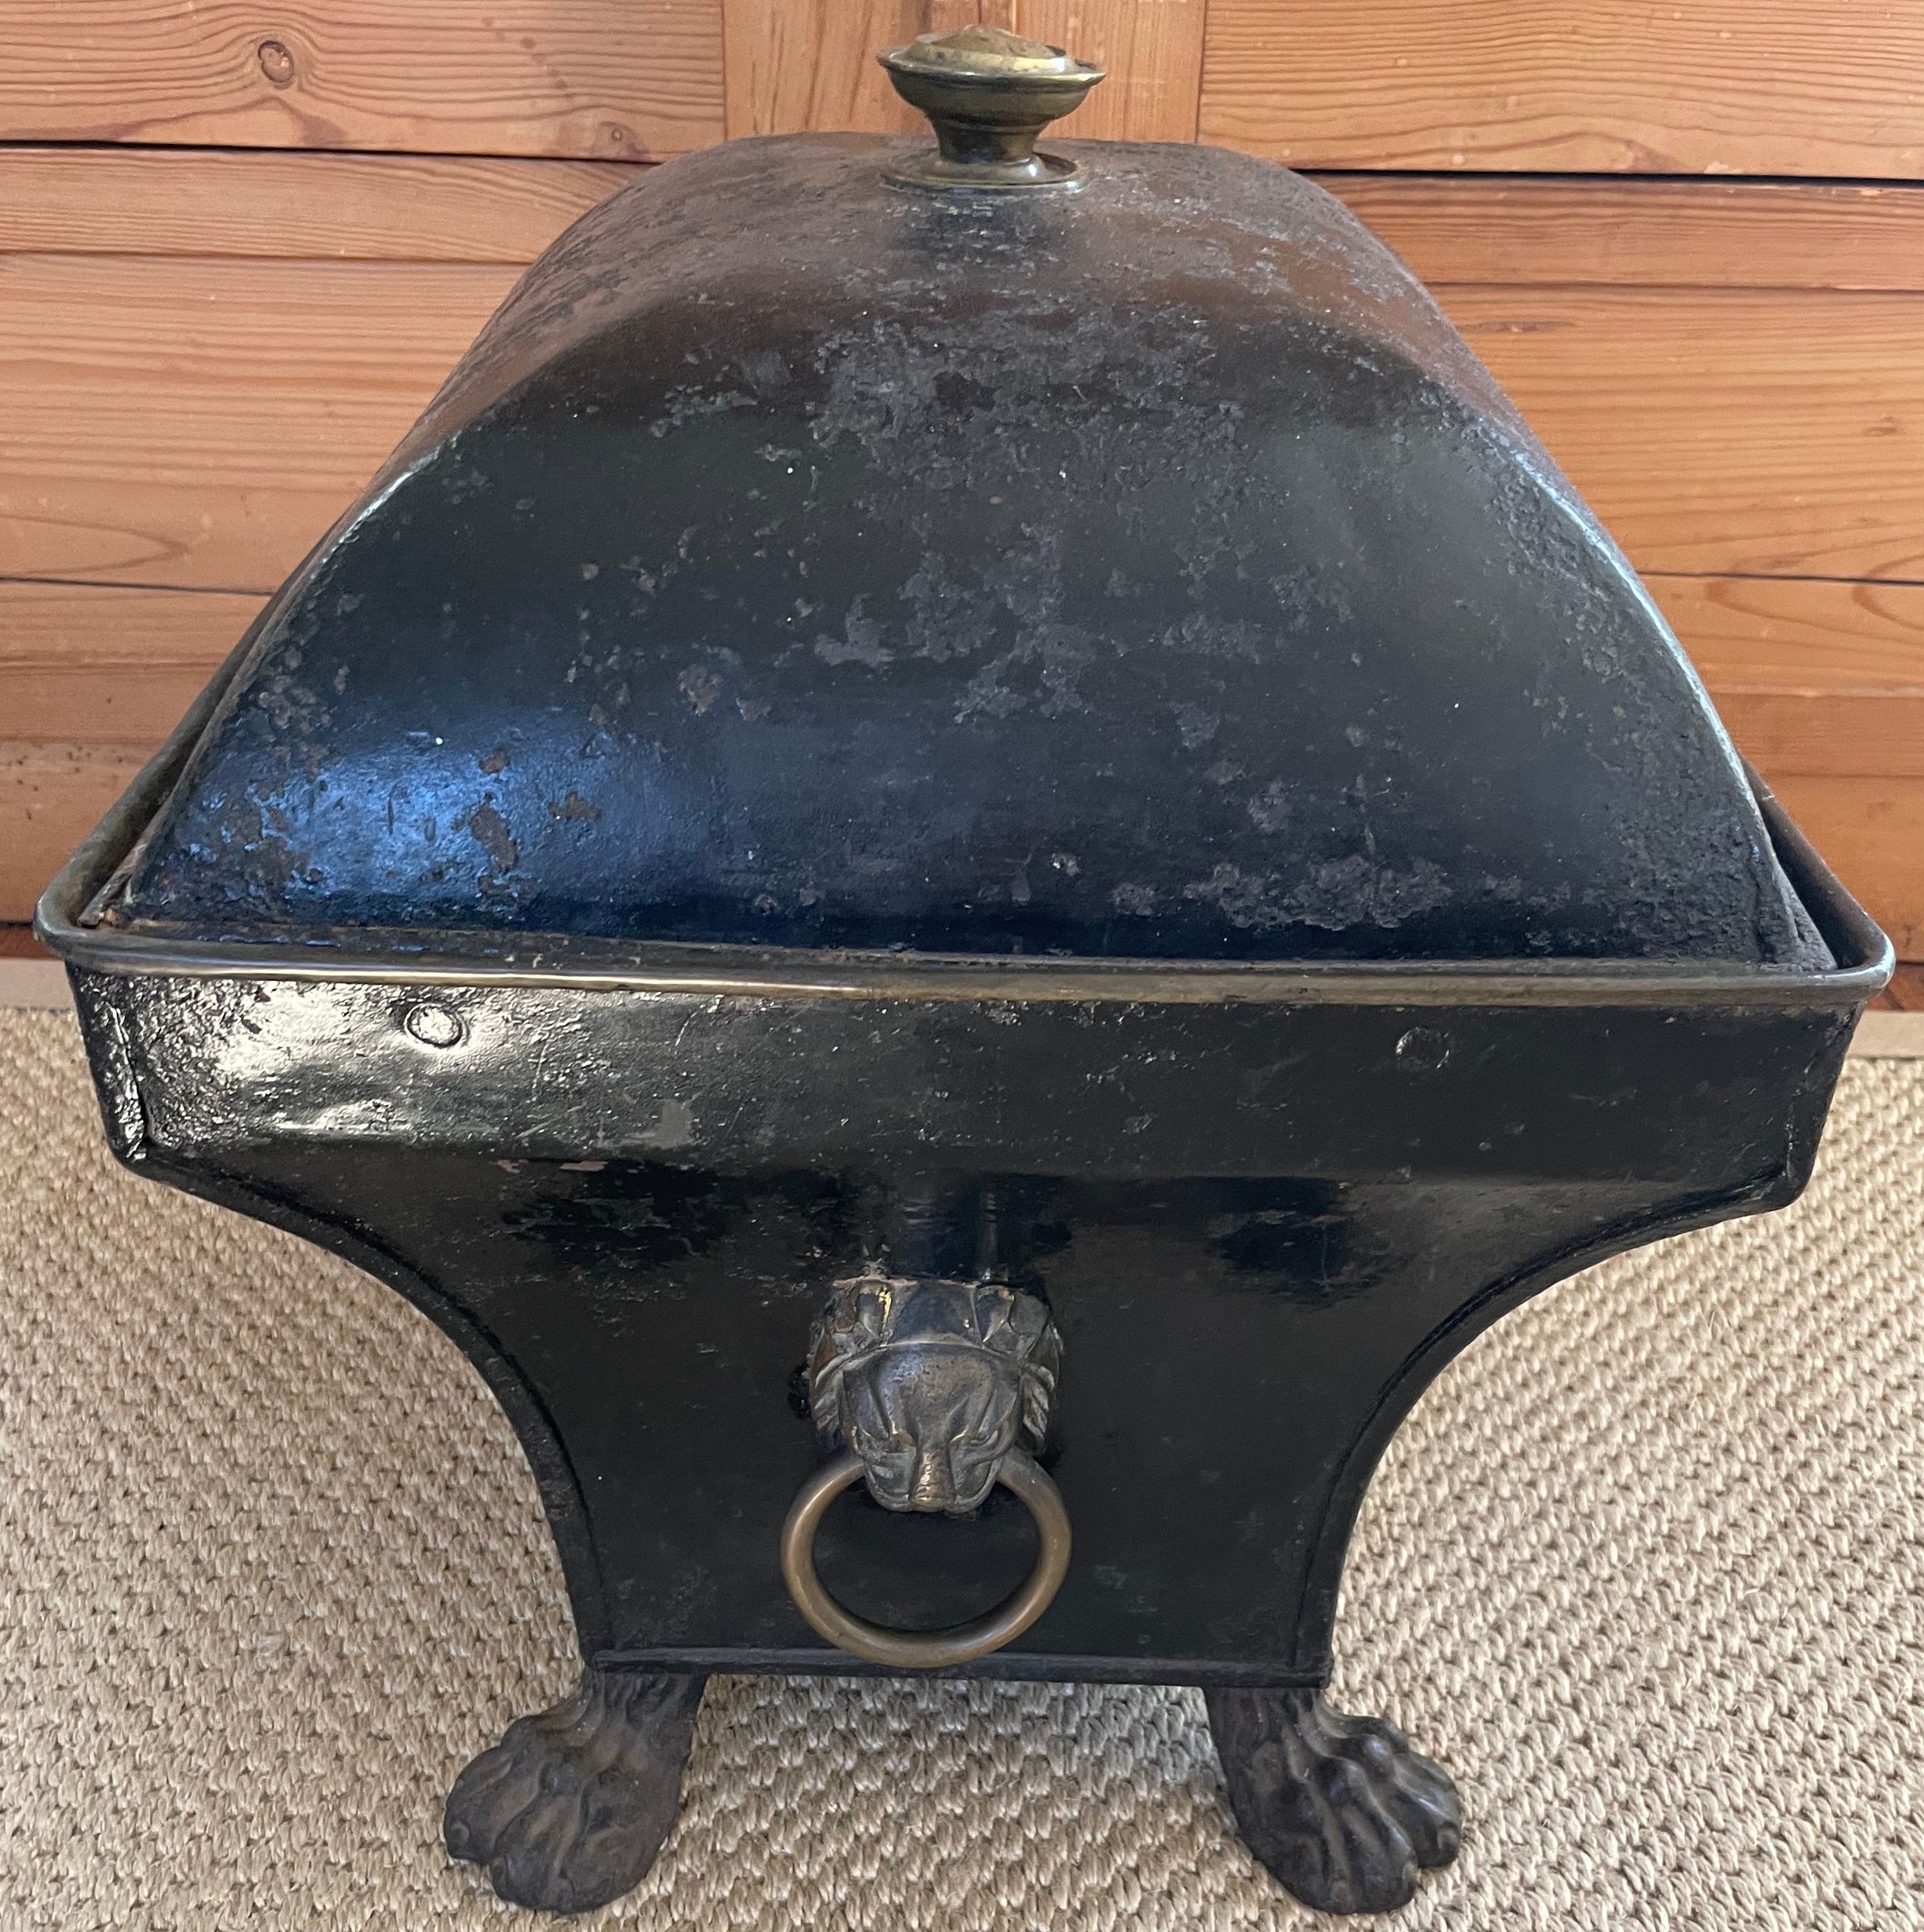 American Empire Black Tole Lion Coal Scuttle Antique sarcophogus-form coal bin/container/cache pot in the American Empire neoclassical
Style with brass finial knopf, lion mask ring handles and paw feet. Wear to bottom commensurate with age and use.